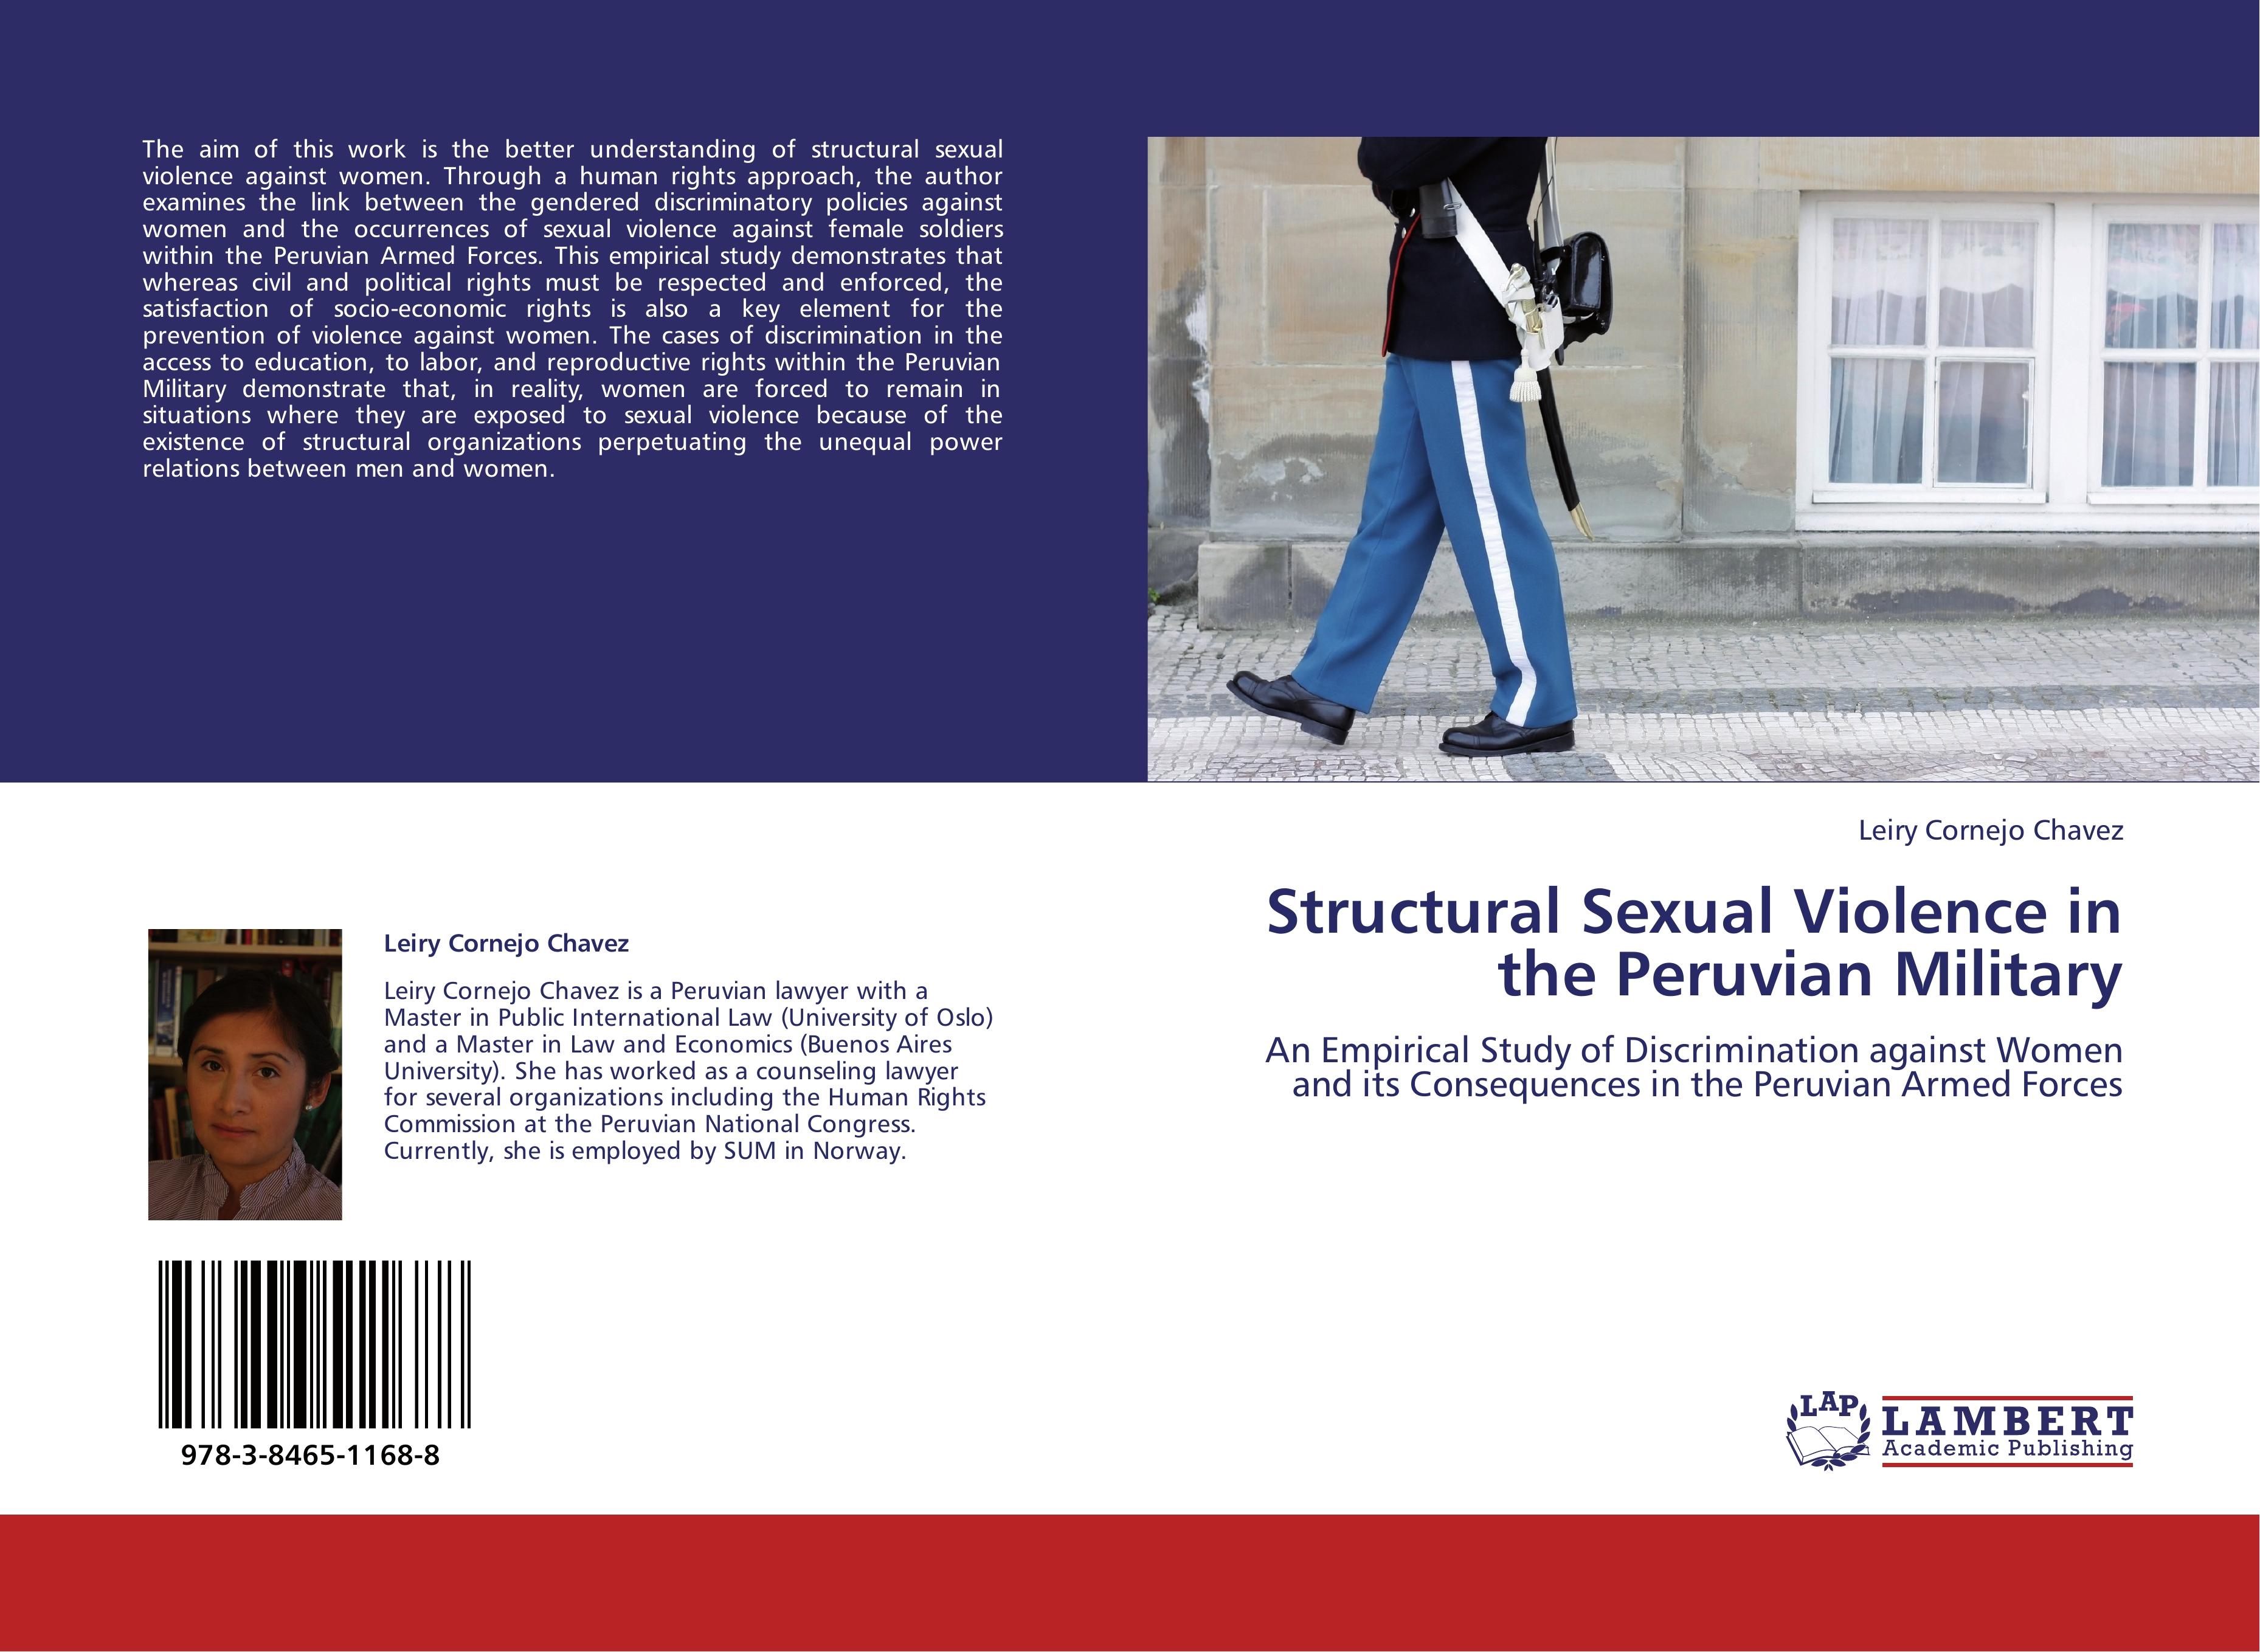 Structural Sexual Violence in the Peruvian Military - Leiry Cornejo Chavez